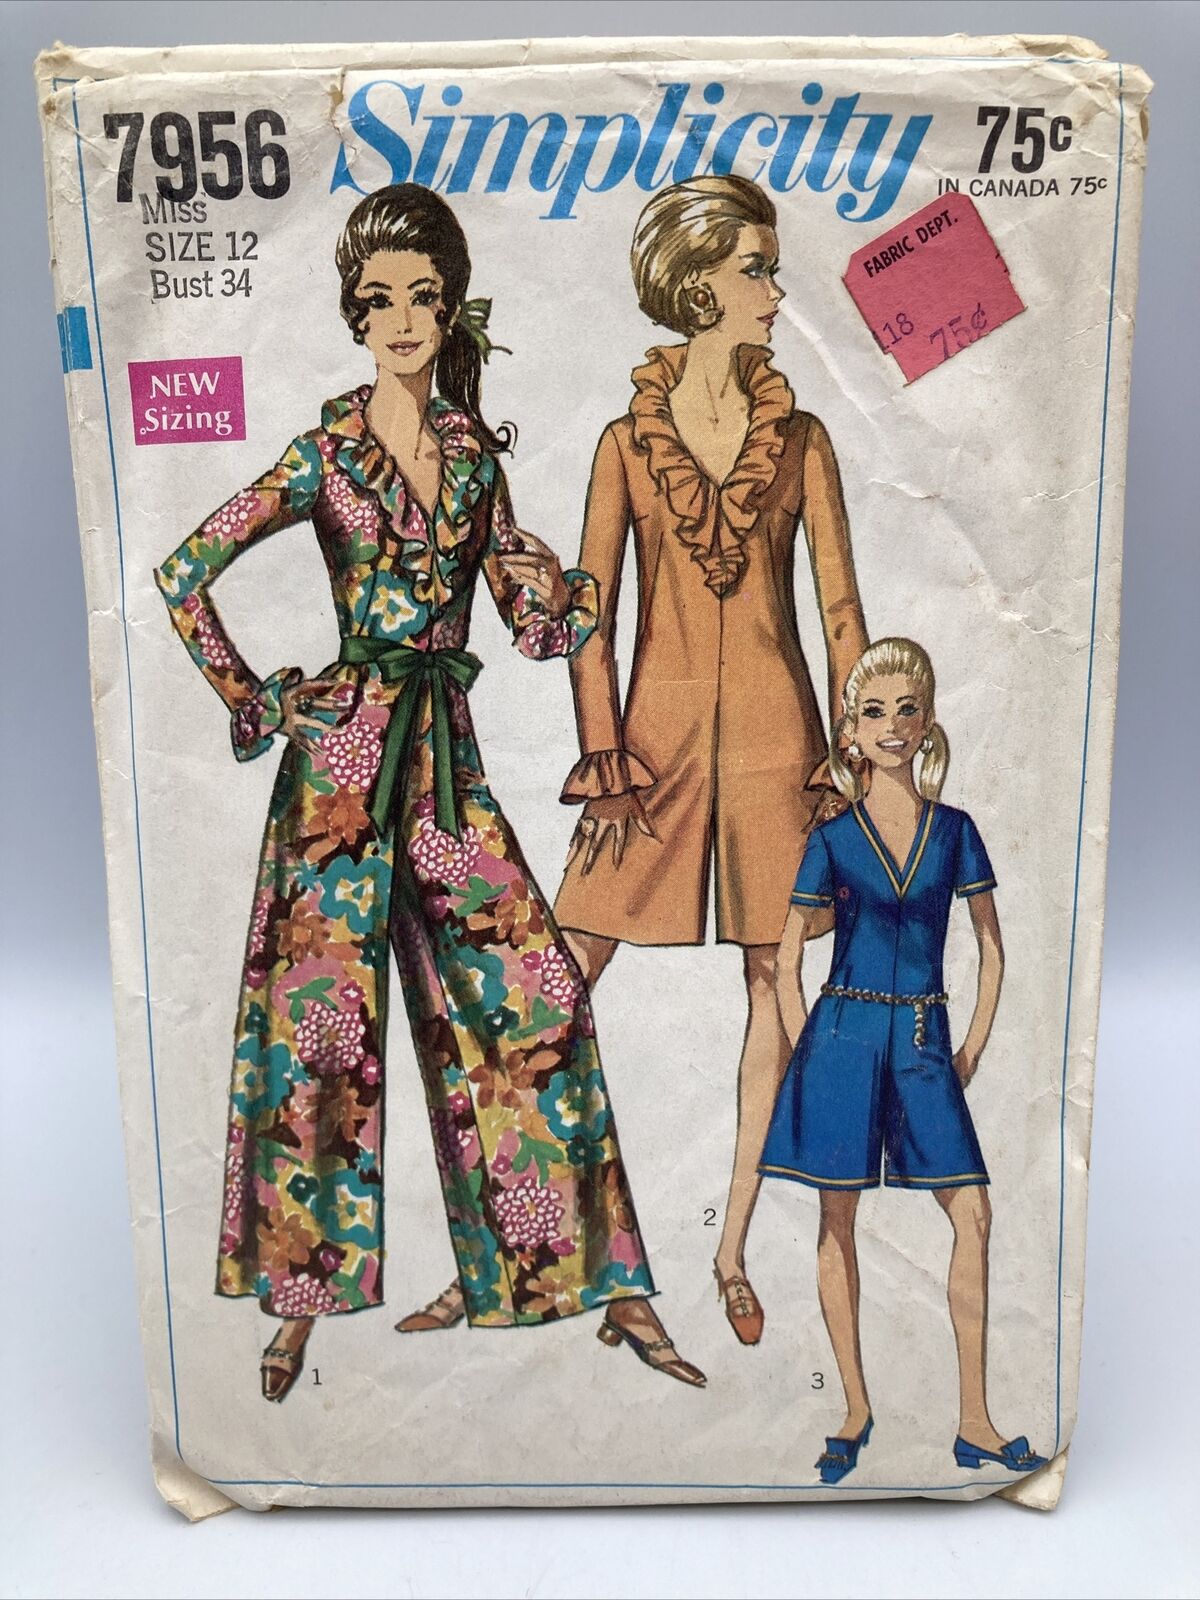 Vintage Lot of 10 Simplicity Sewing Patterns 1966-1969 Misses’ Sizes 12-18